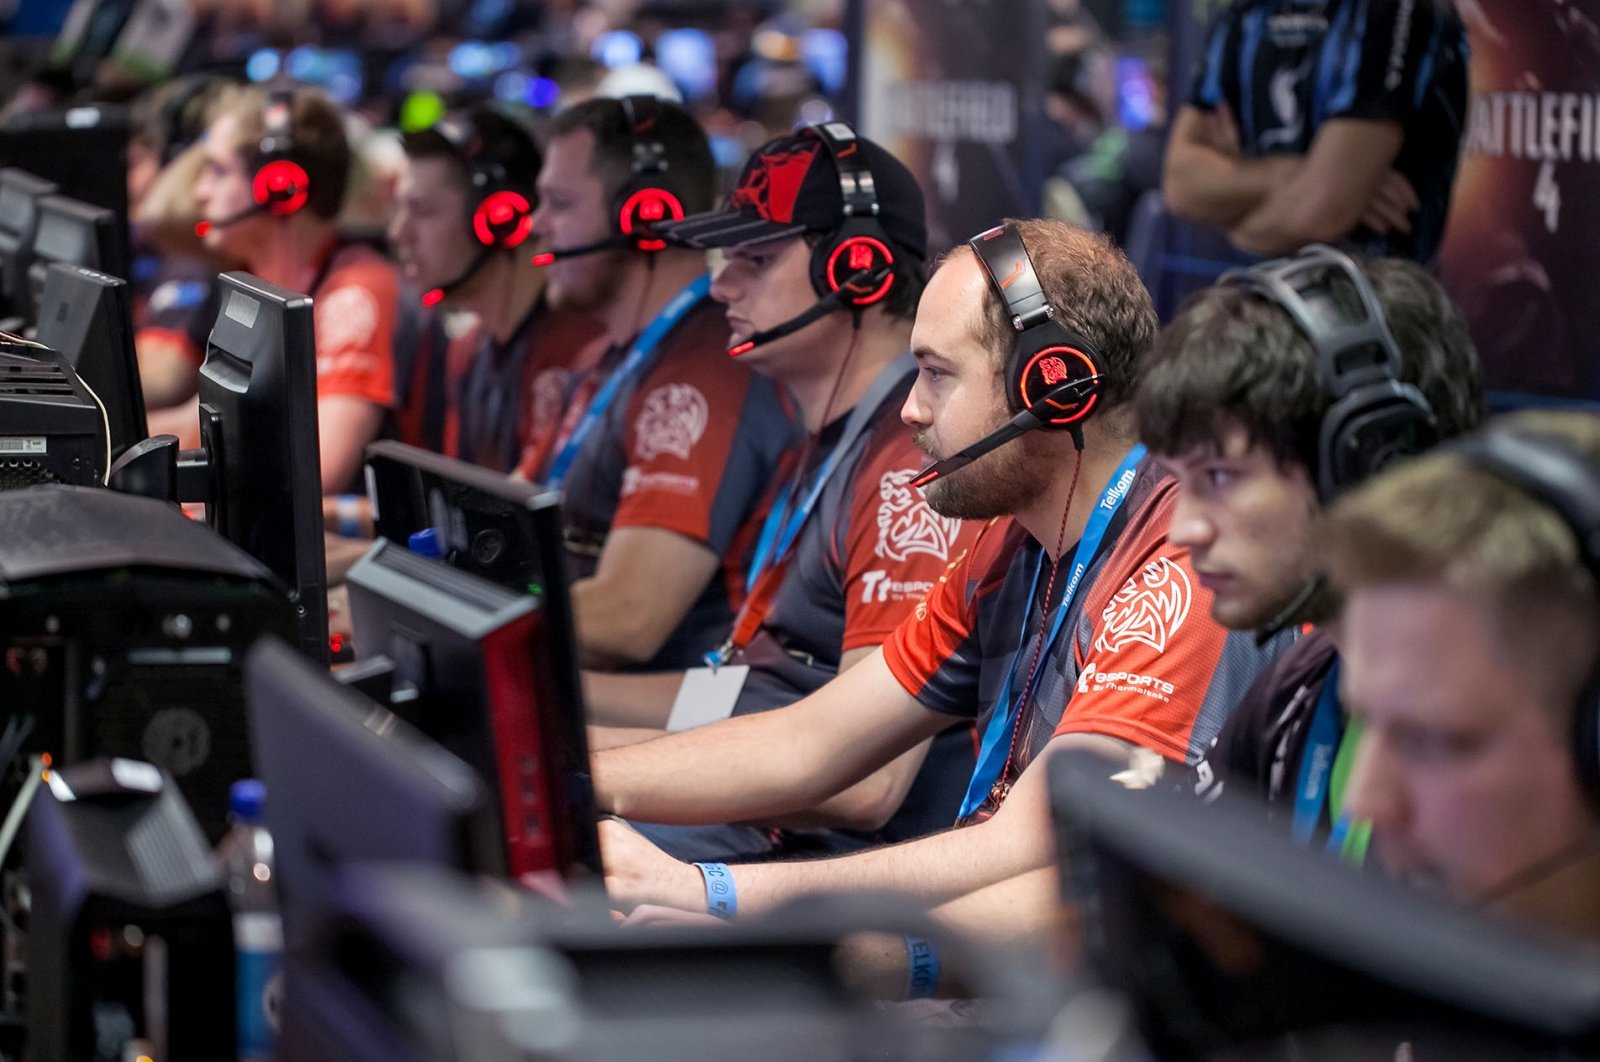 Gamers participate in an online gaming event, in Johannesburg, South Africa, Oct. 9, 2015. (Shutterstock Photo)